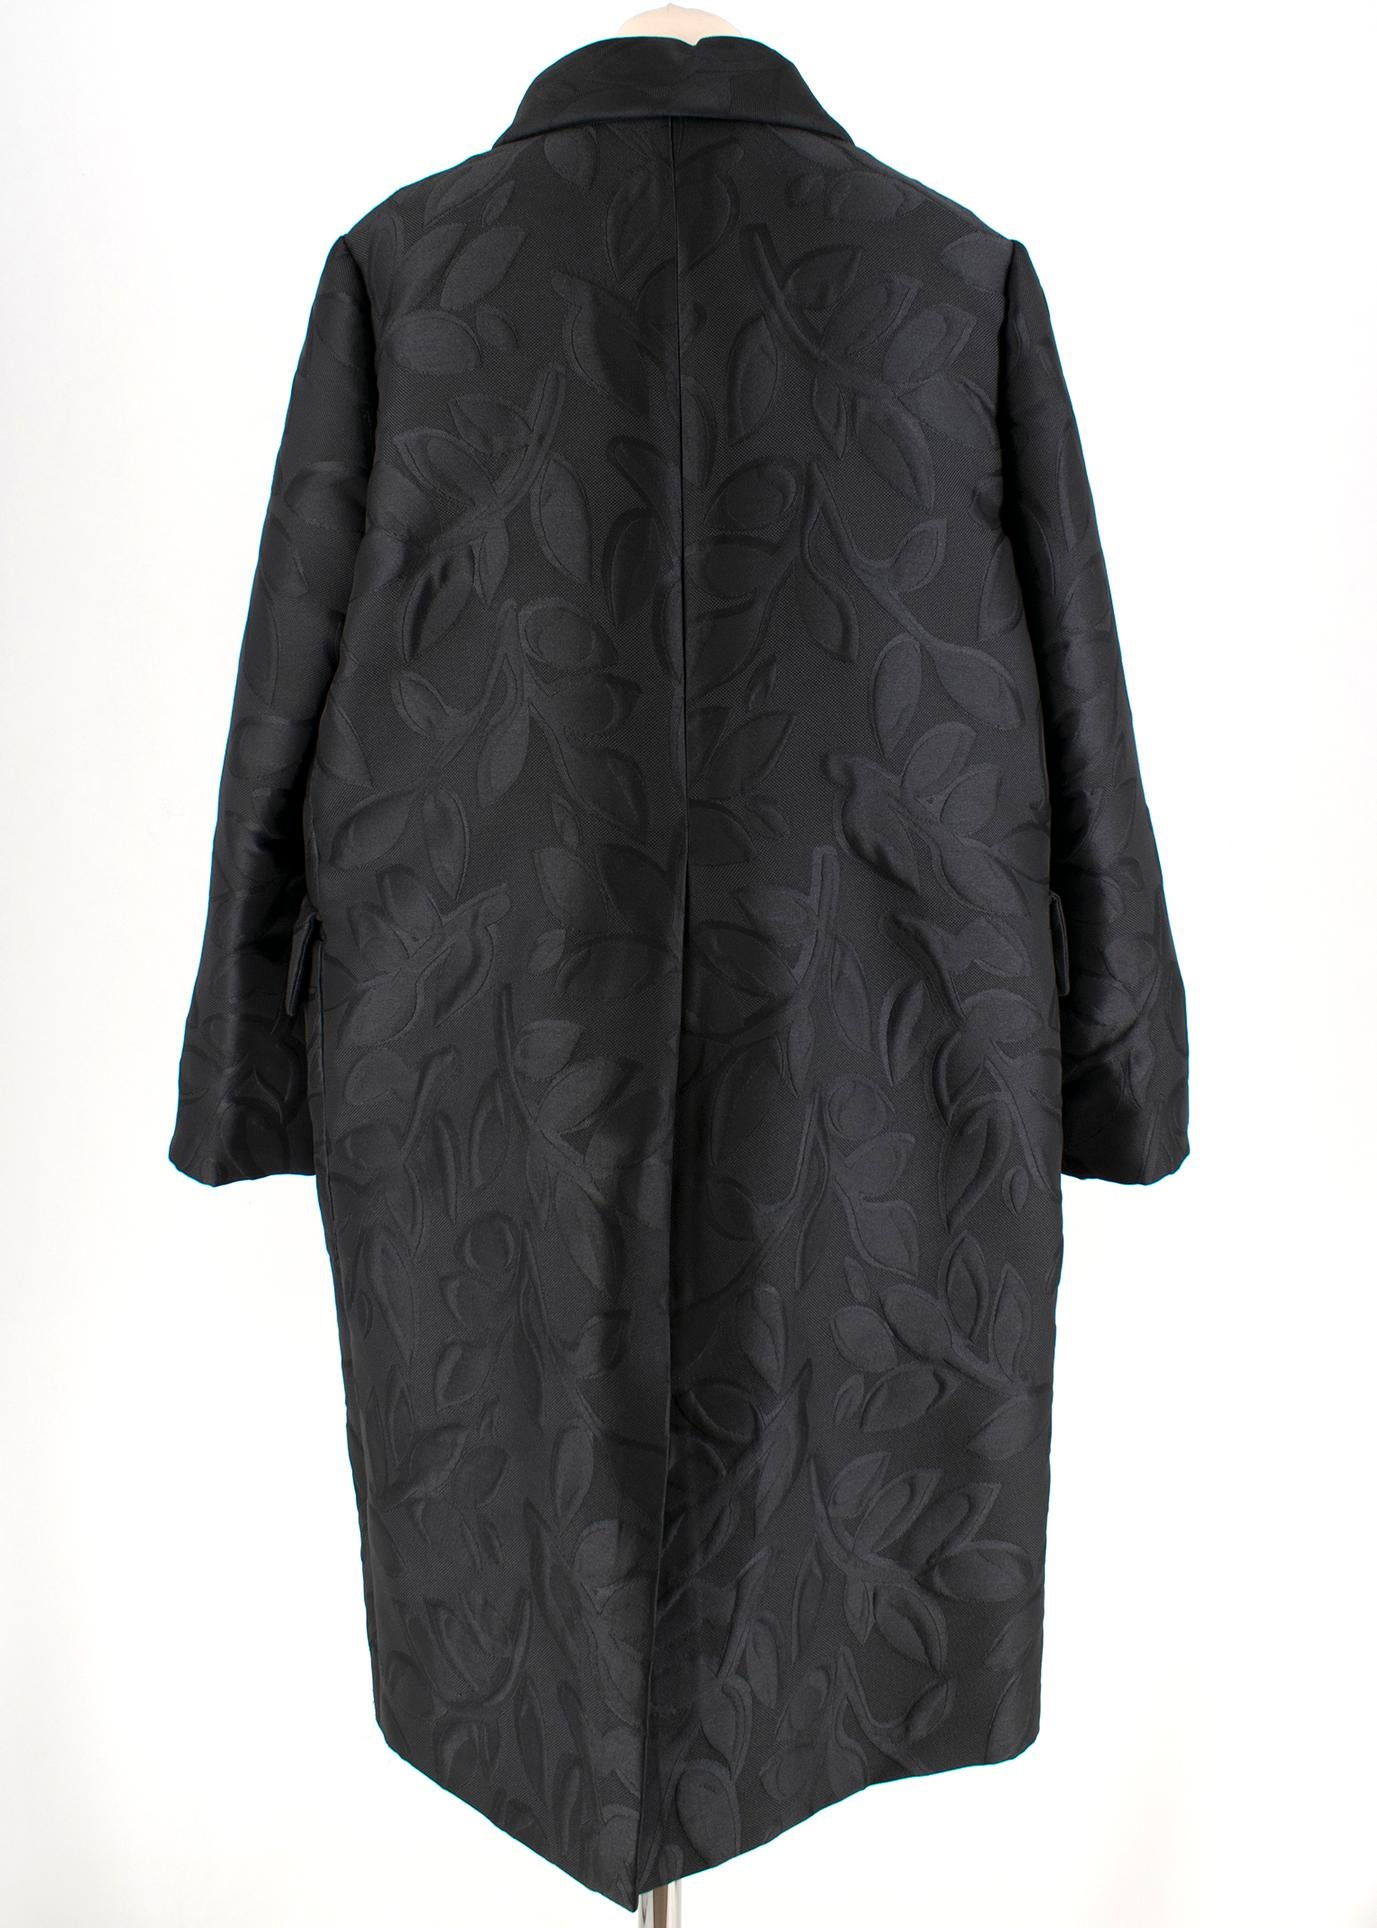 Marni Black Leaves Embroidered Coat - Size US 6 In Excellent Condition For Sale In London, GB